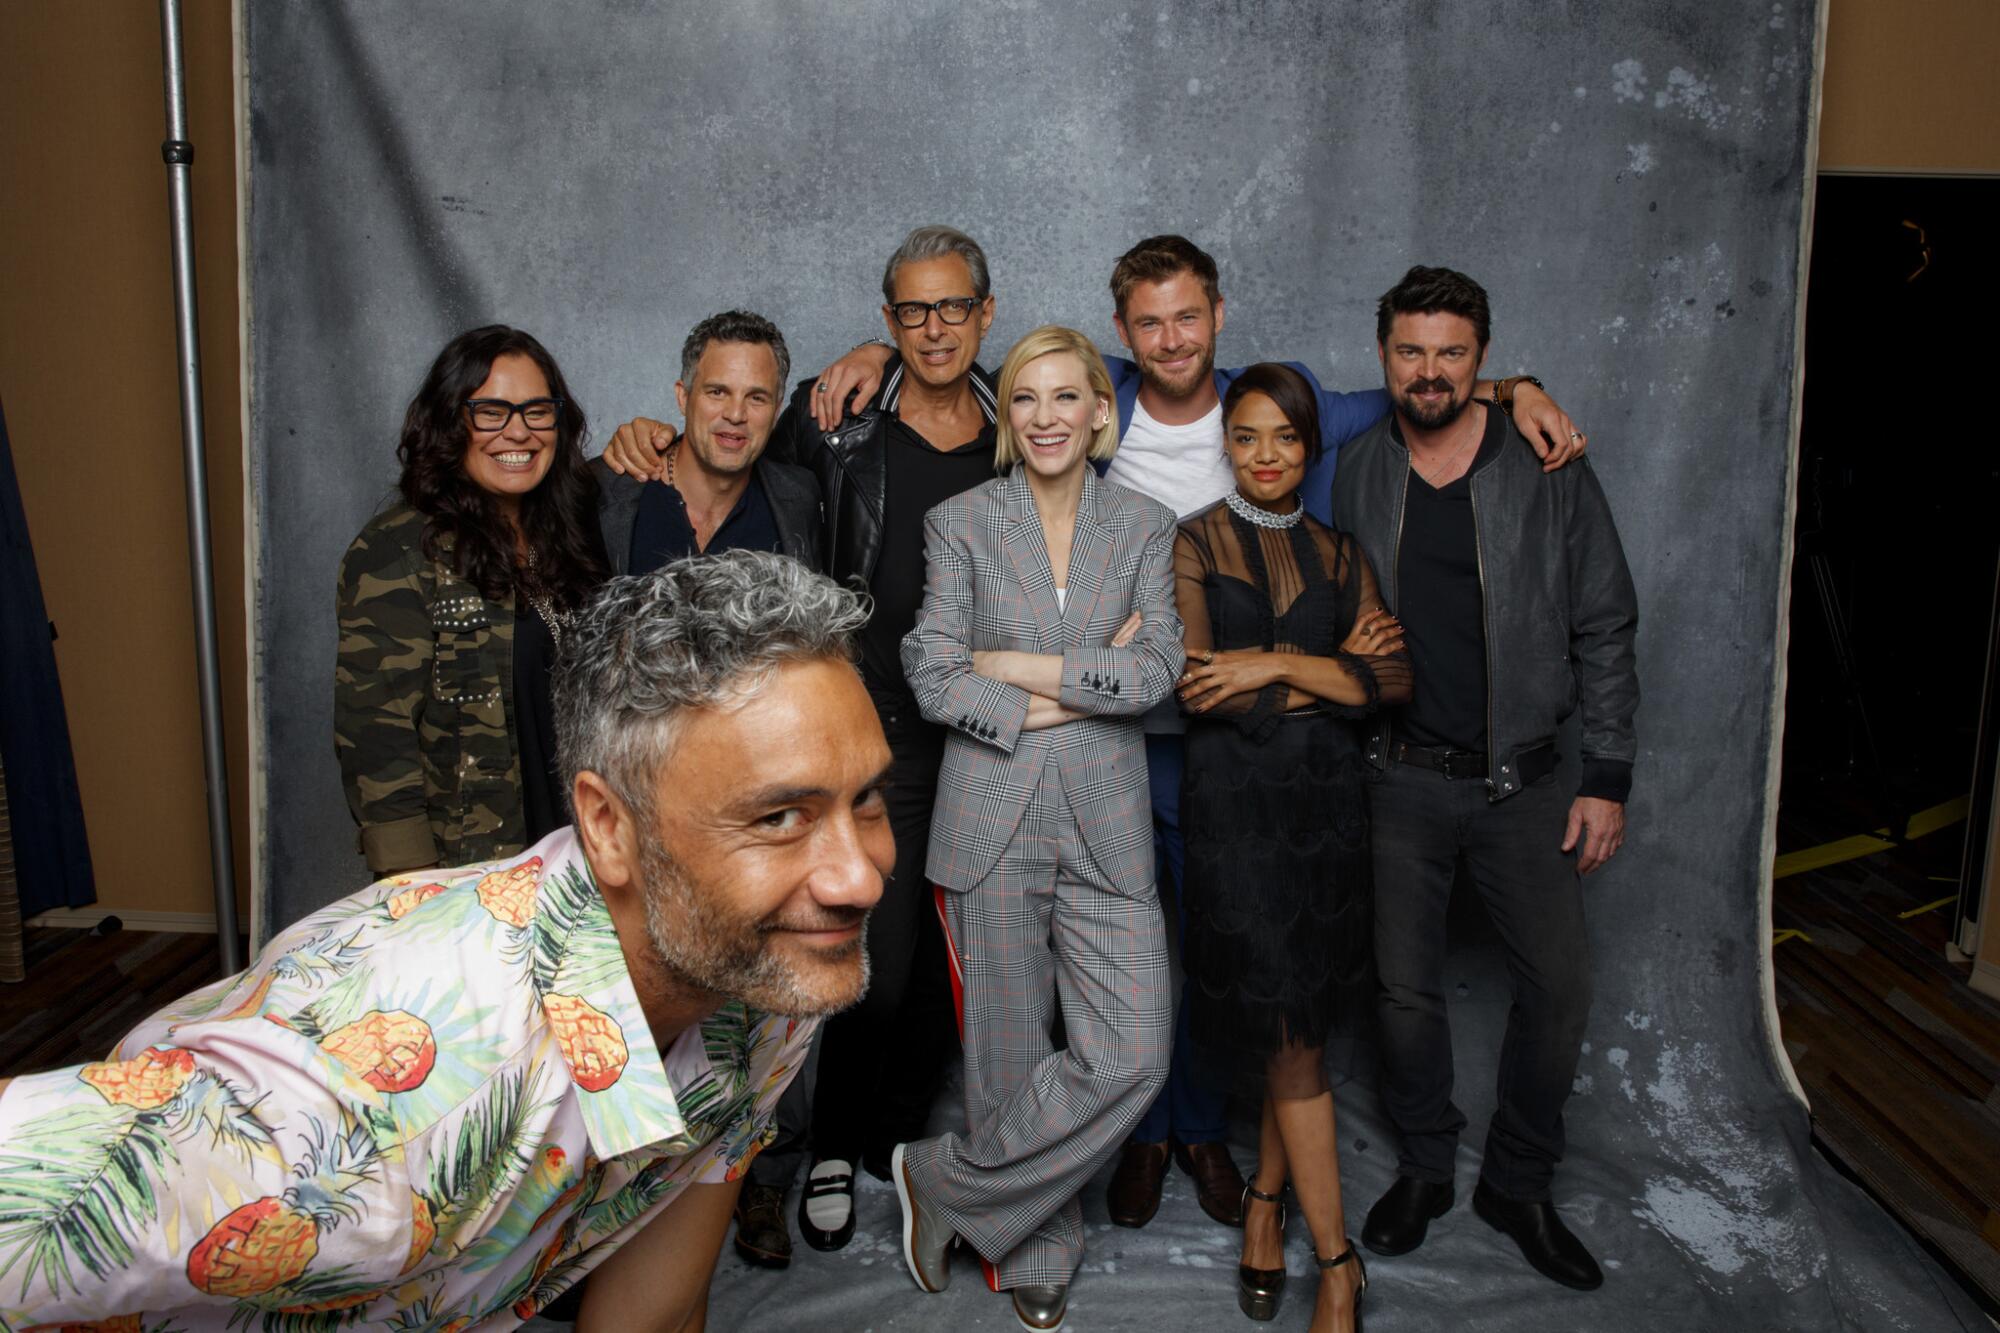 The cast of the film "Thor: Ragnarok,"  photographed in the L.A. Times photo studio at Comic-Con 2017